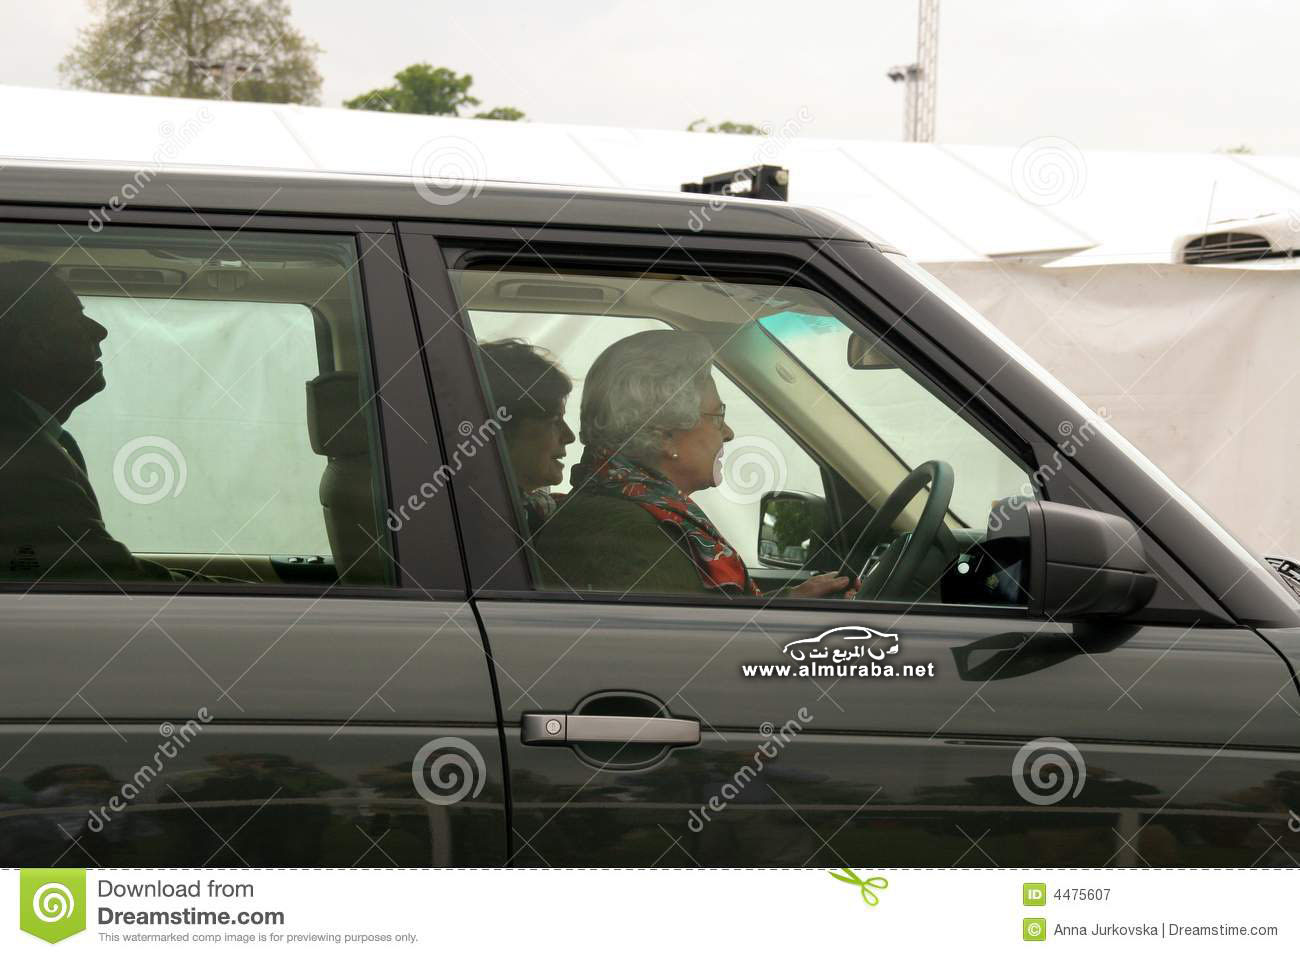 http://www.dreamstime.com/royalty-free-stock-photography-queen-elizabeth-driving-car-image4475607